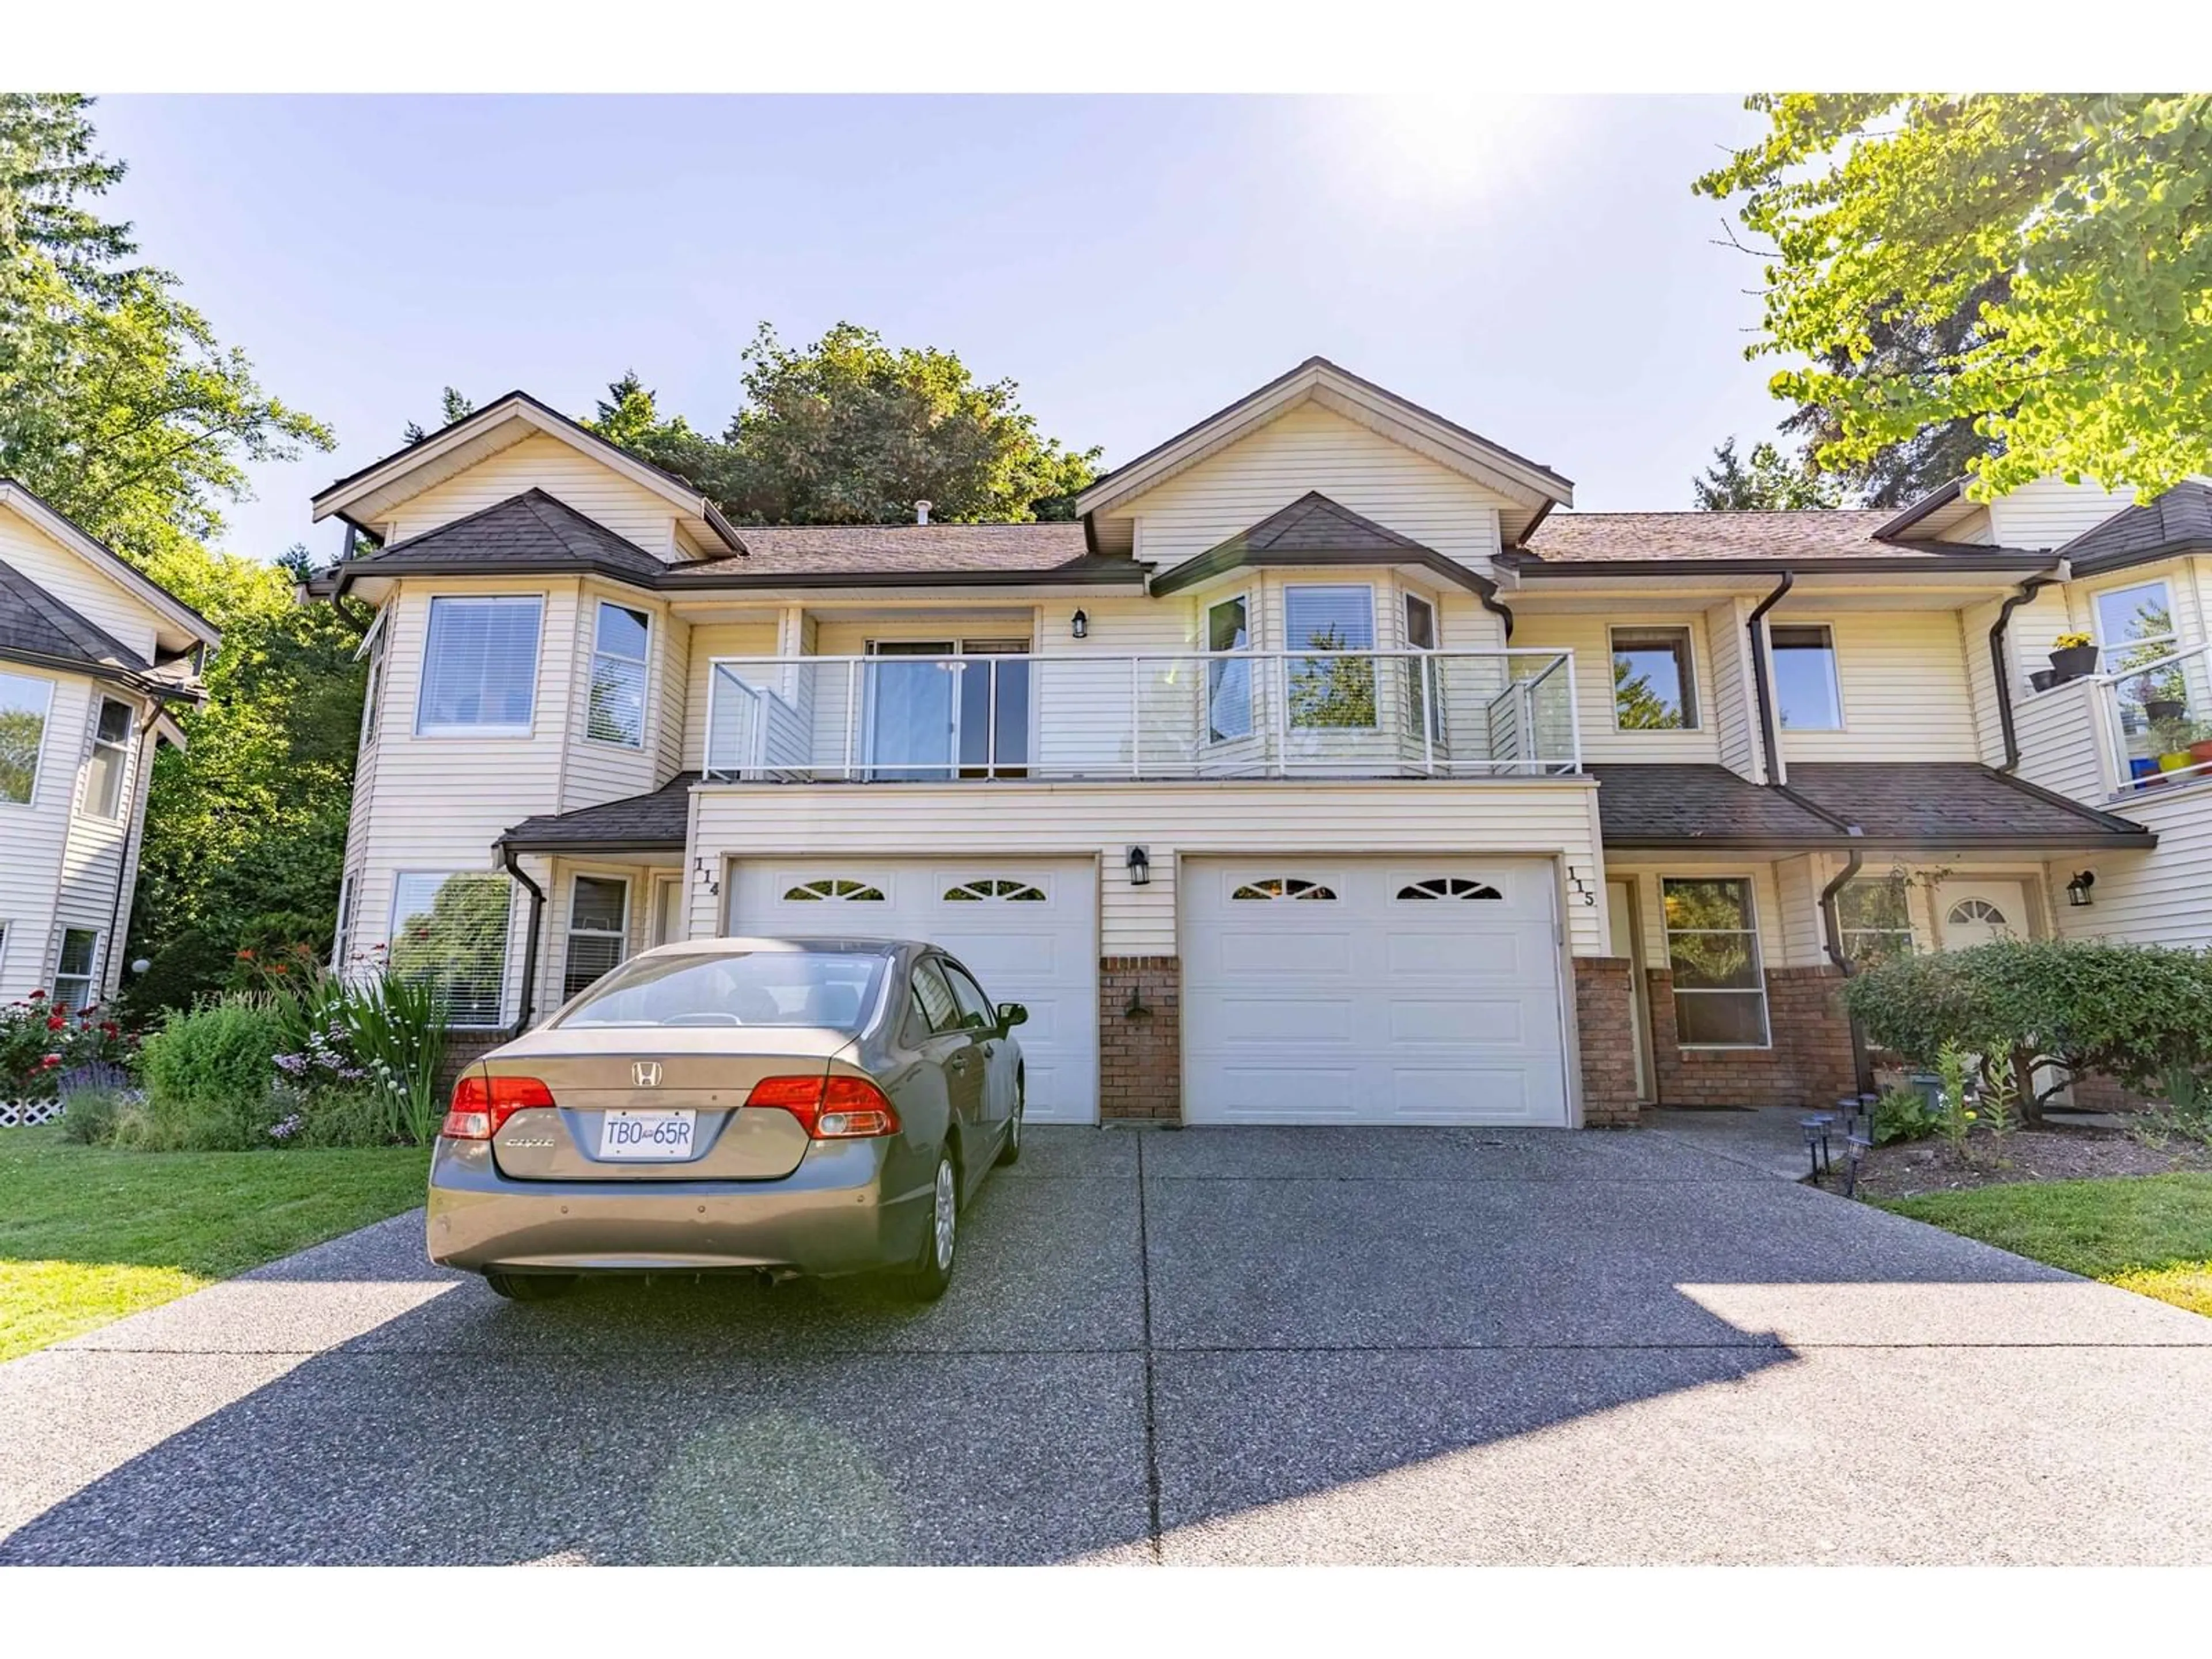 A pic from exterior of the house or condo for 115 6841 138 STREET, Surrey British Columbia V3W0A7